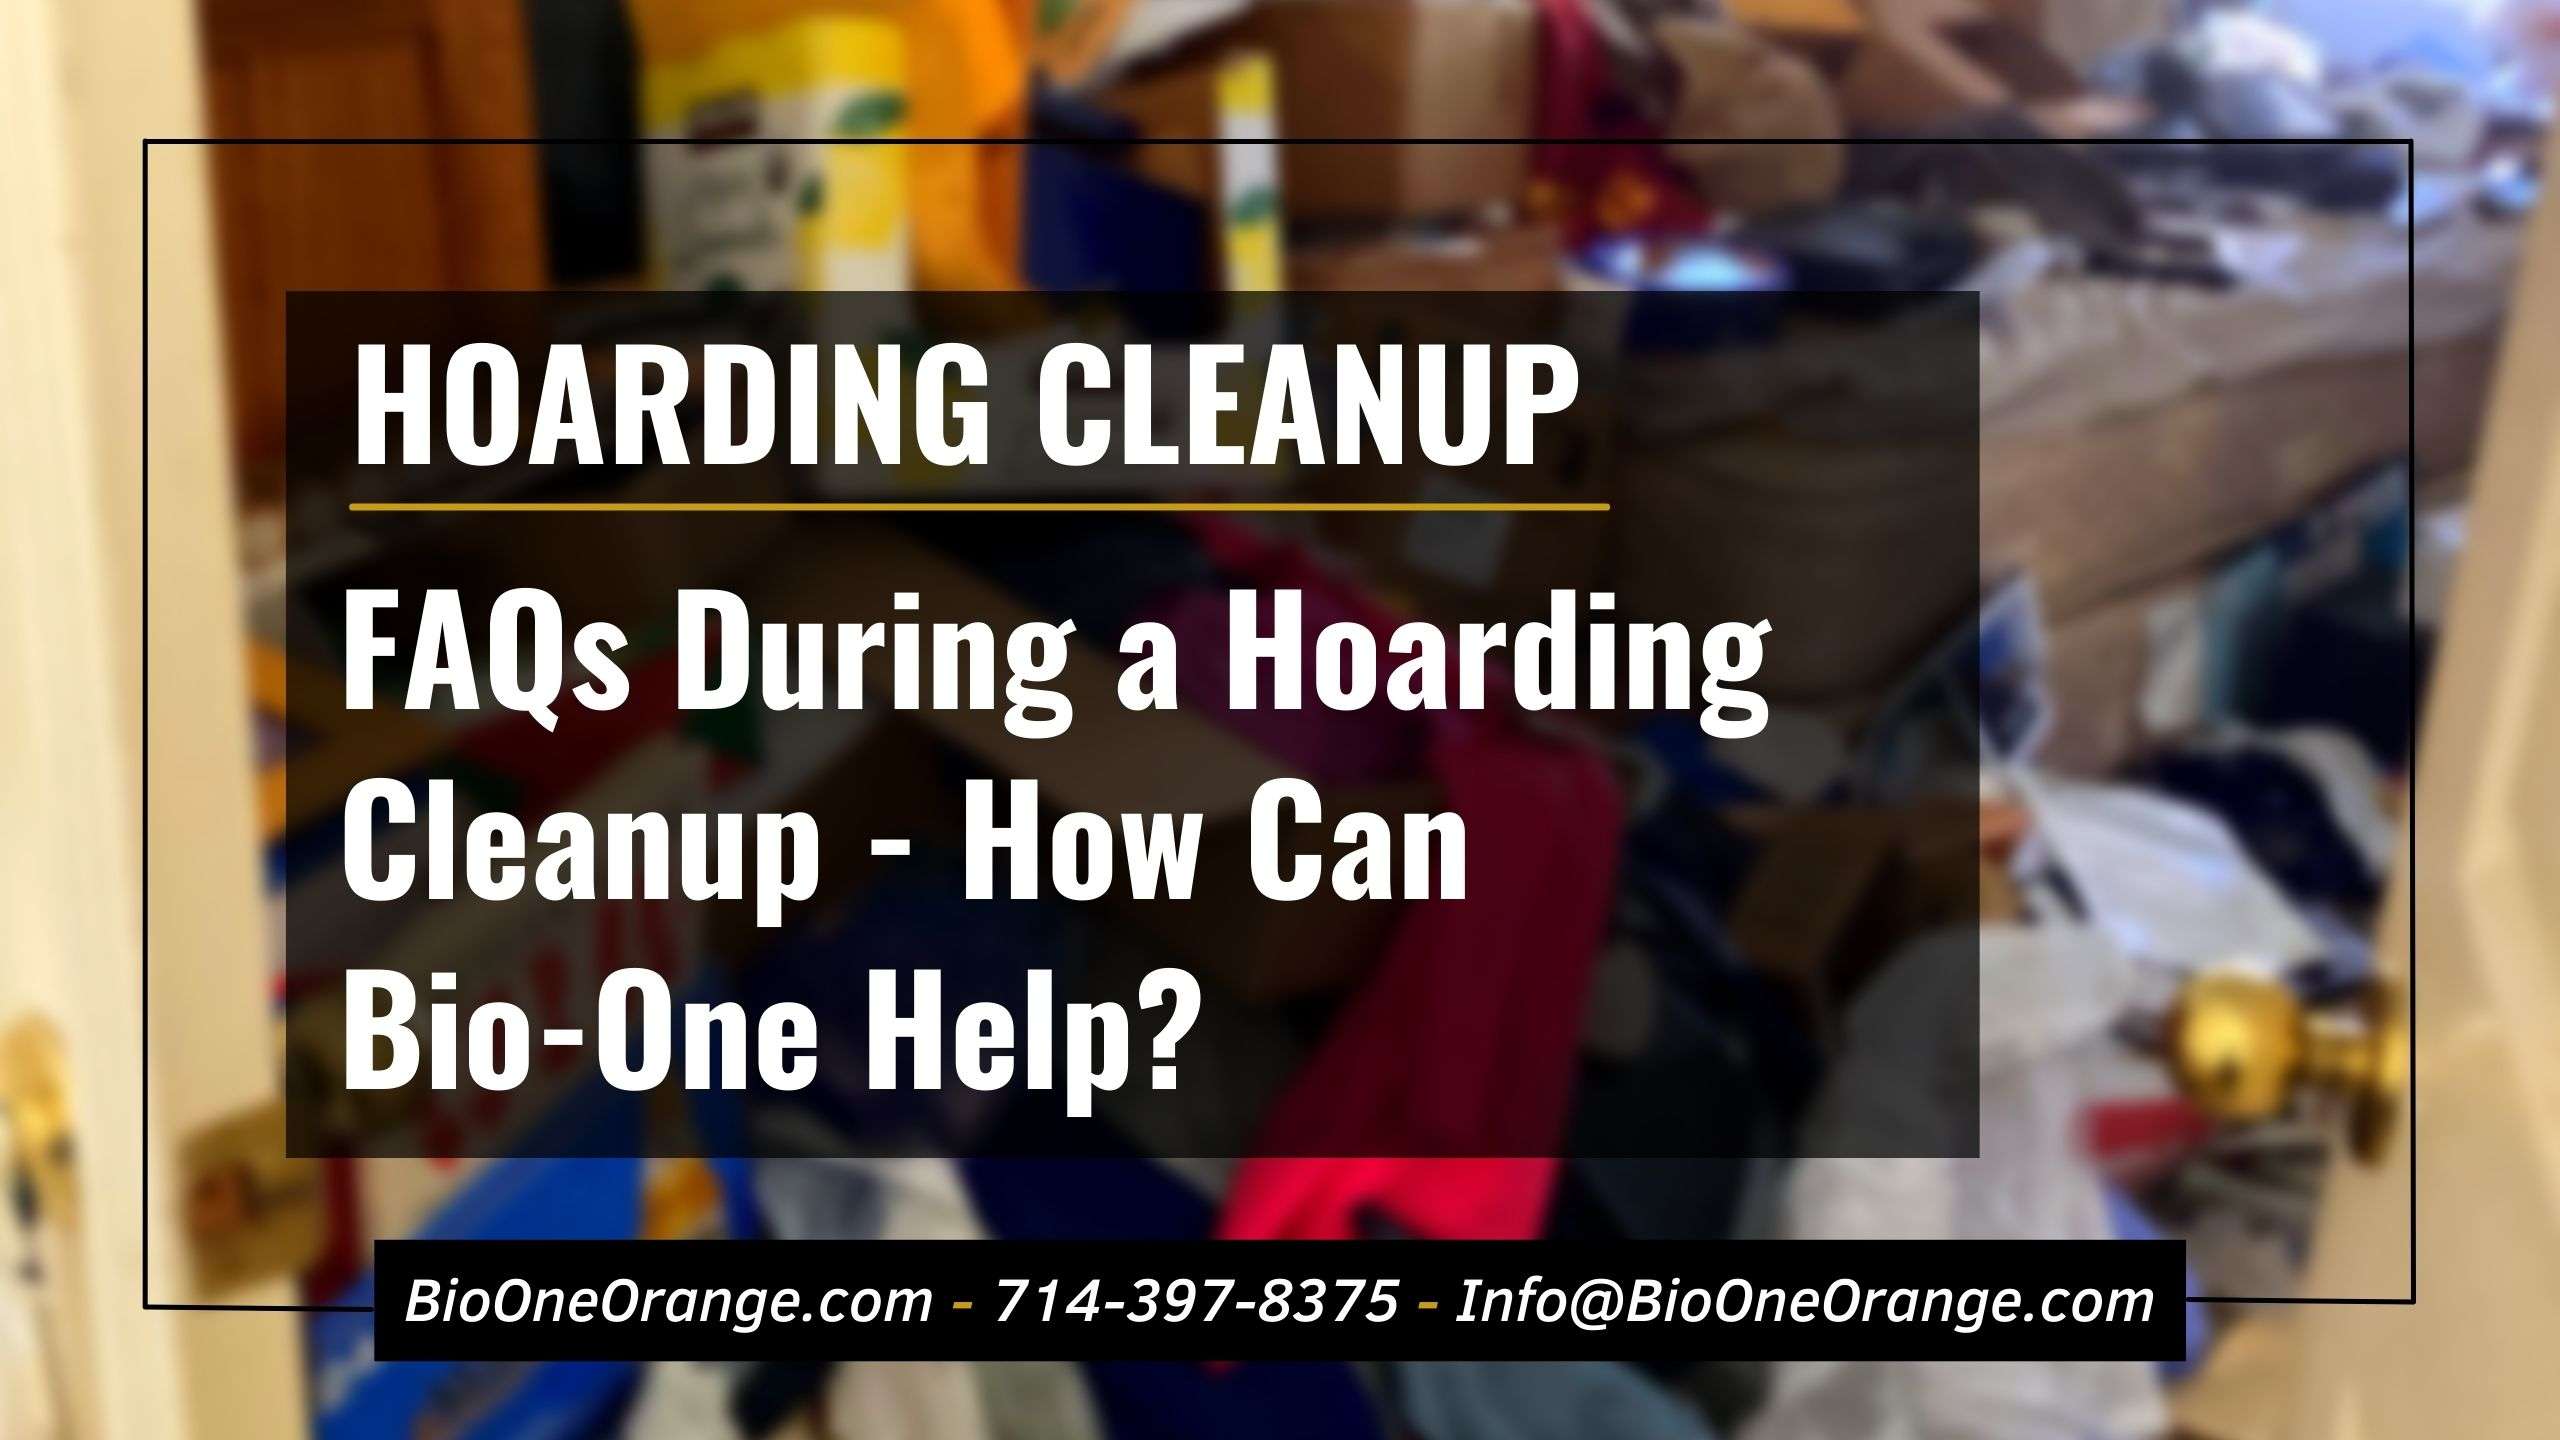 FAQs During a Hoarding Cleanup - How  Can Bio-One Help?